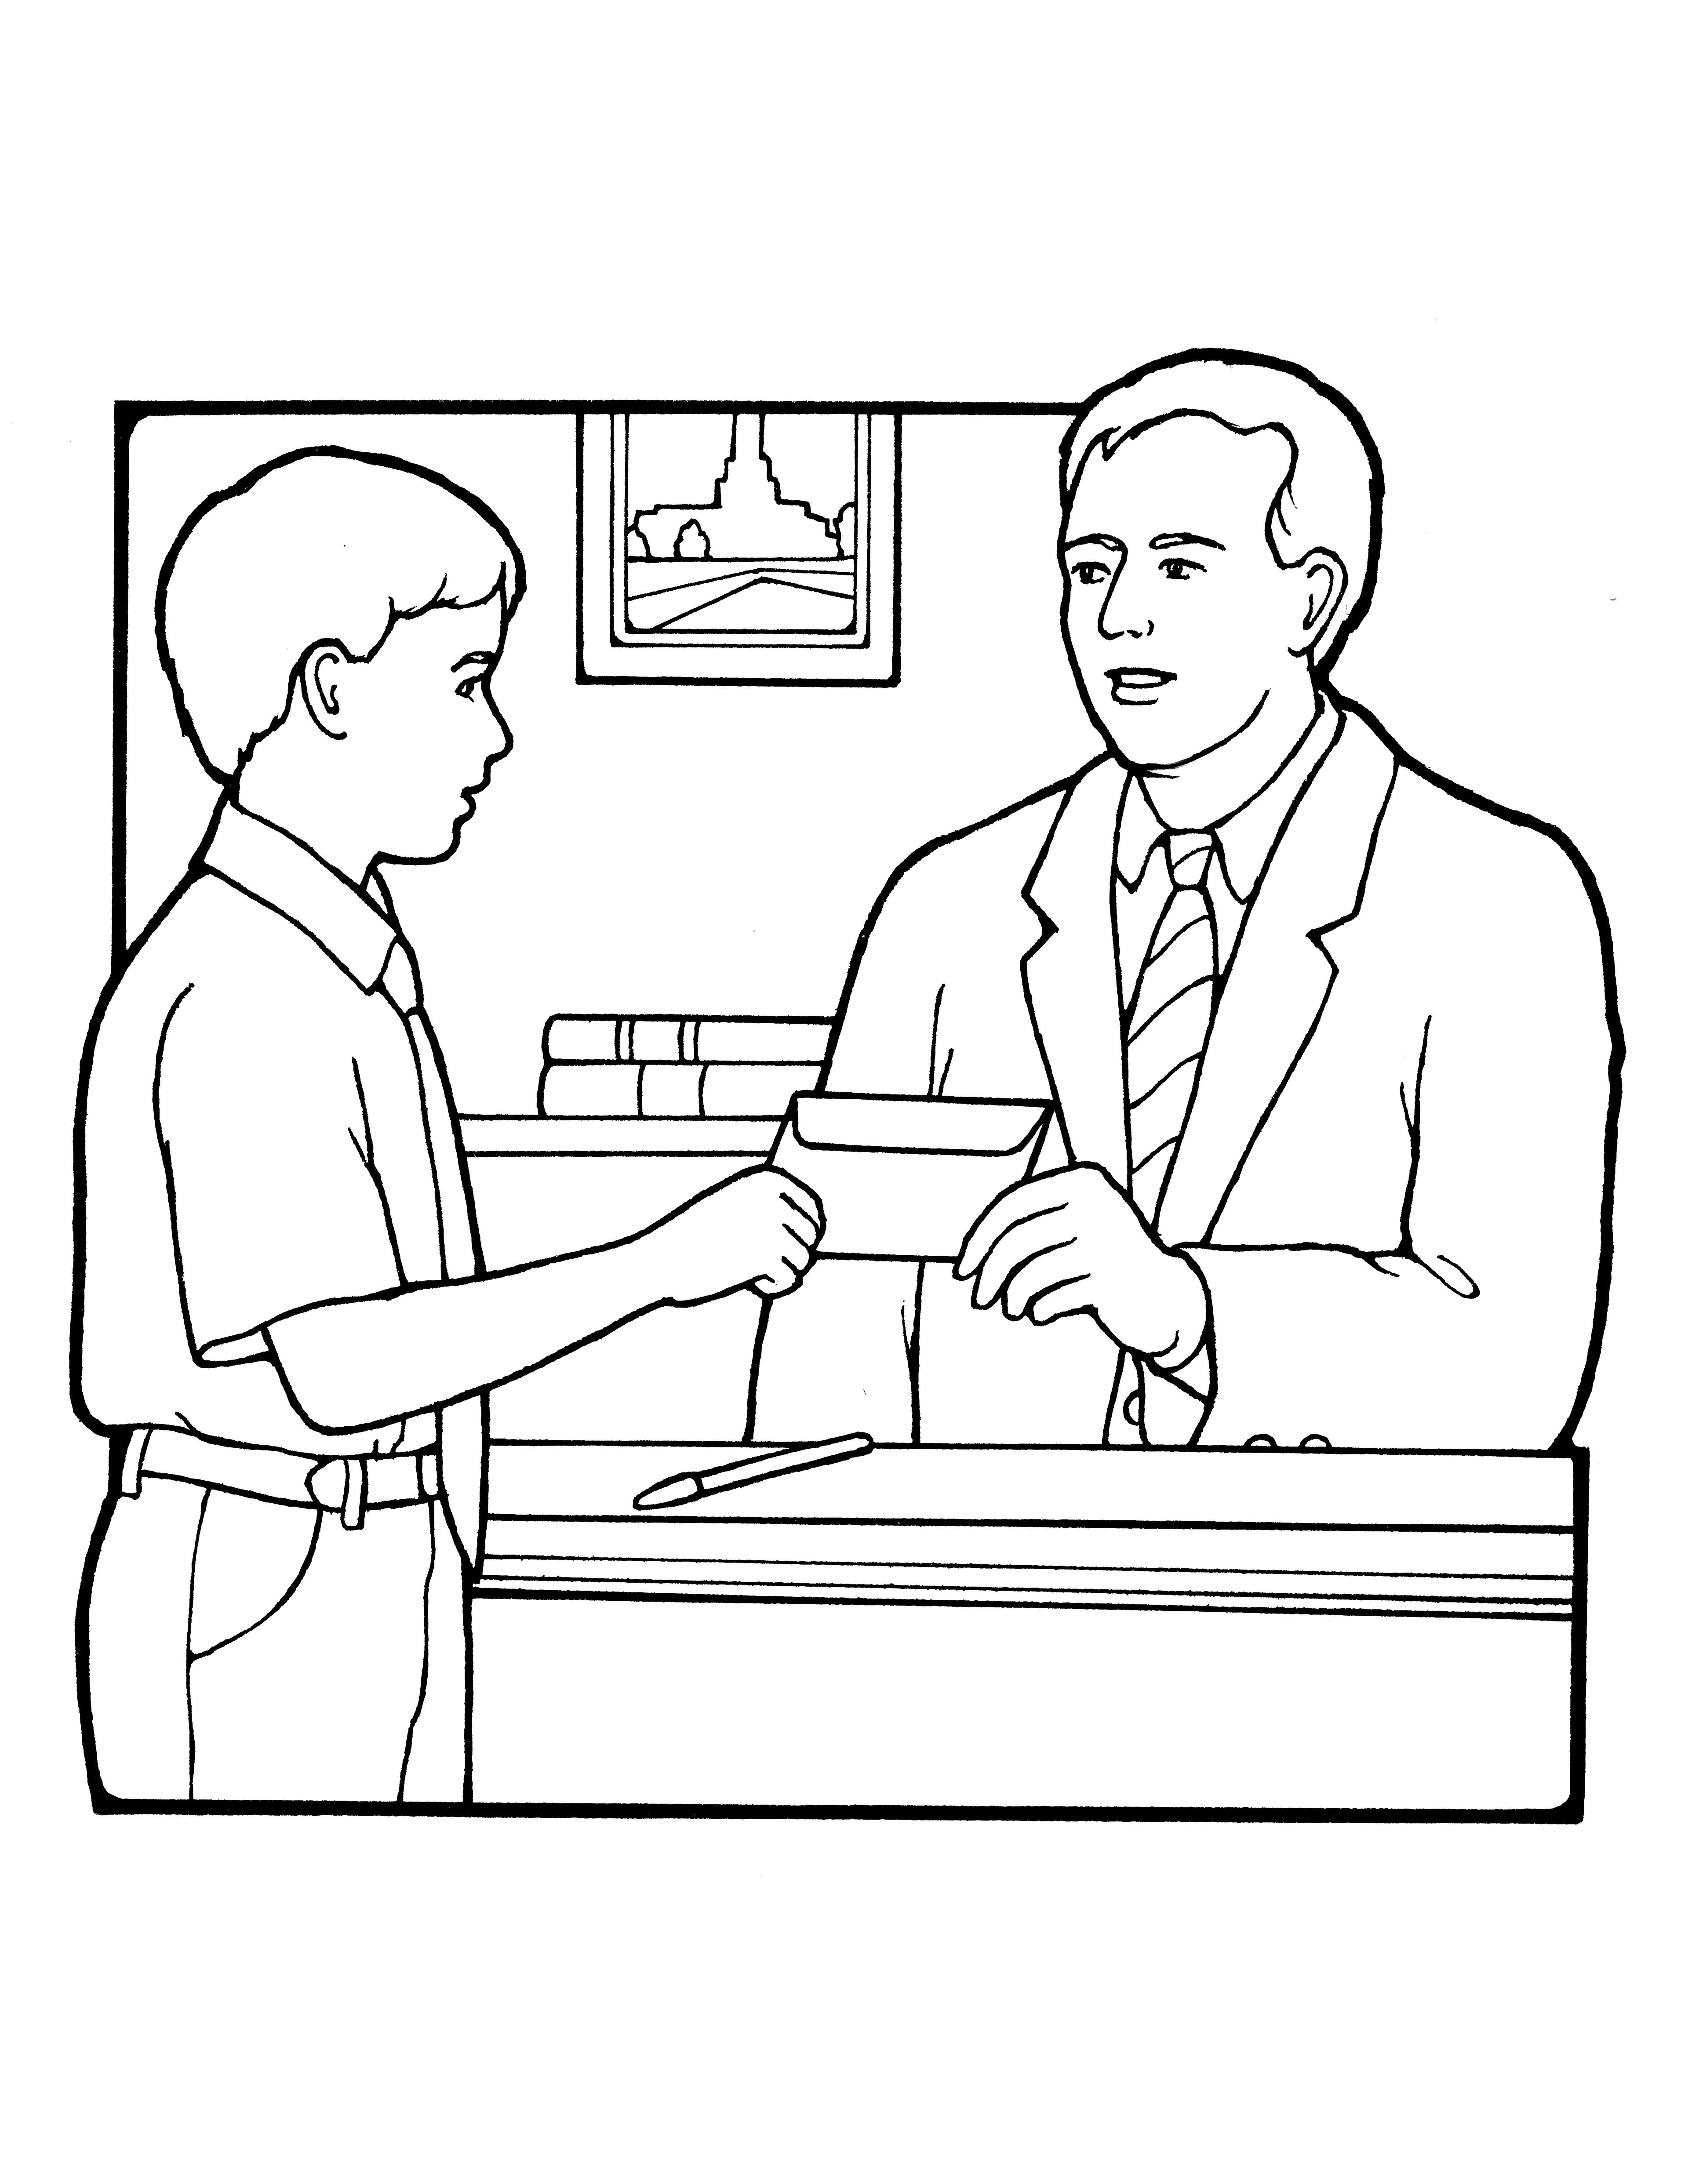 An illustration of a boy giving his bishop a tithing envelope.